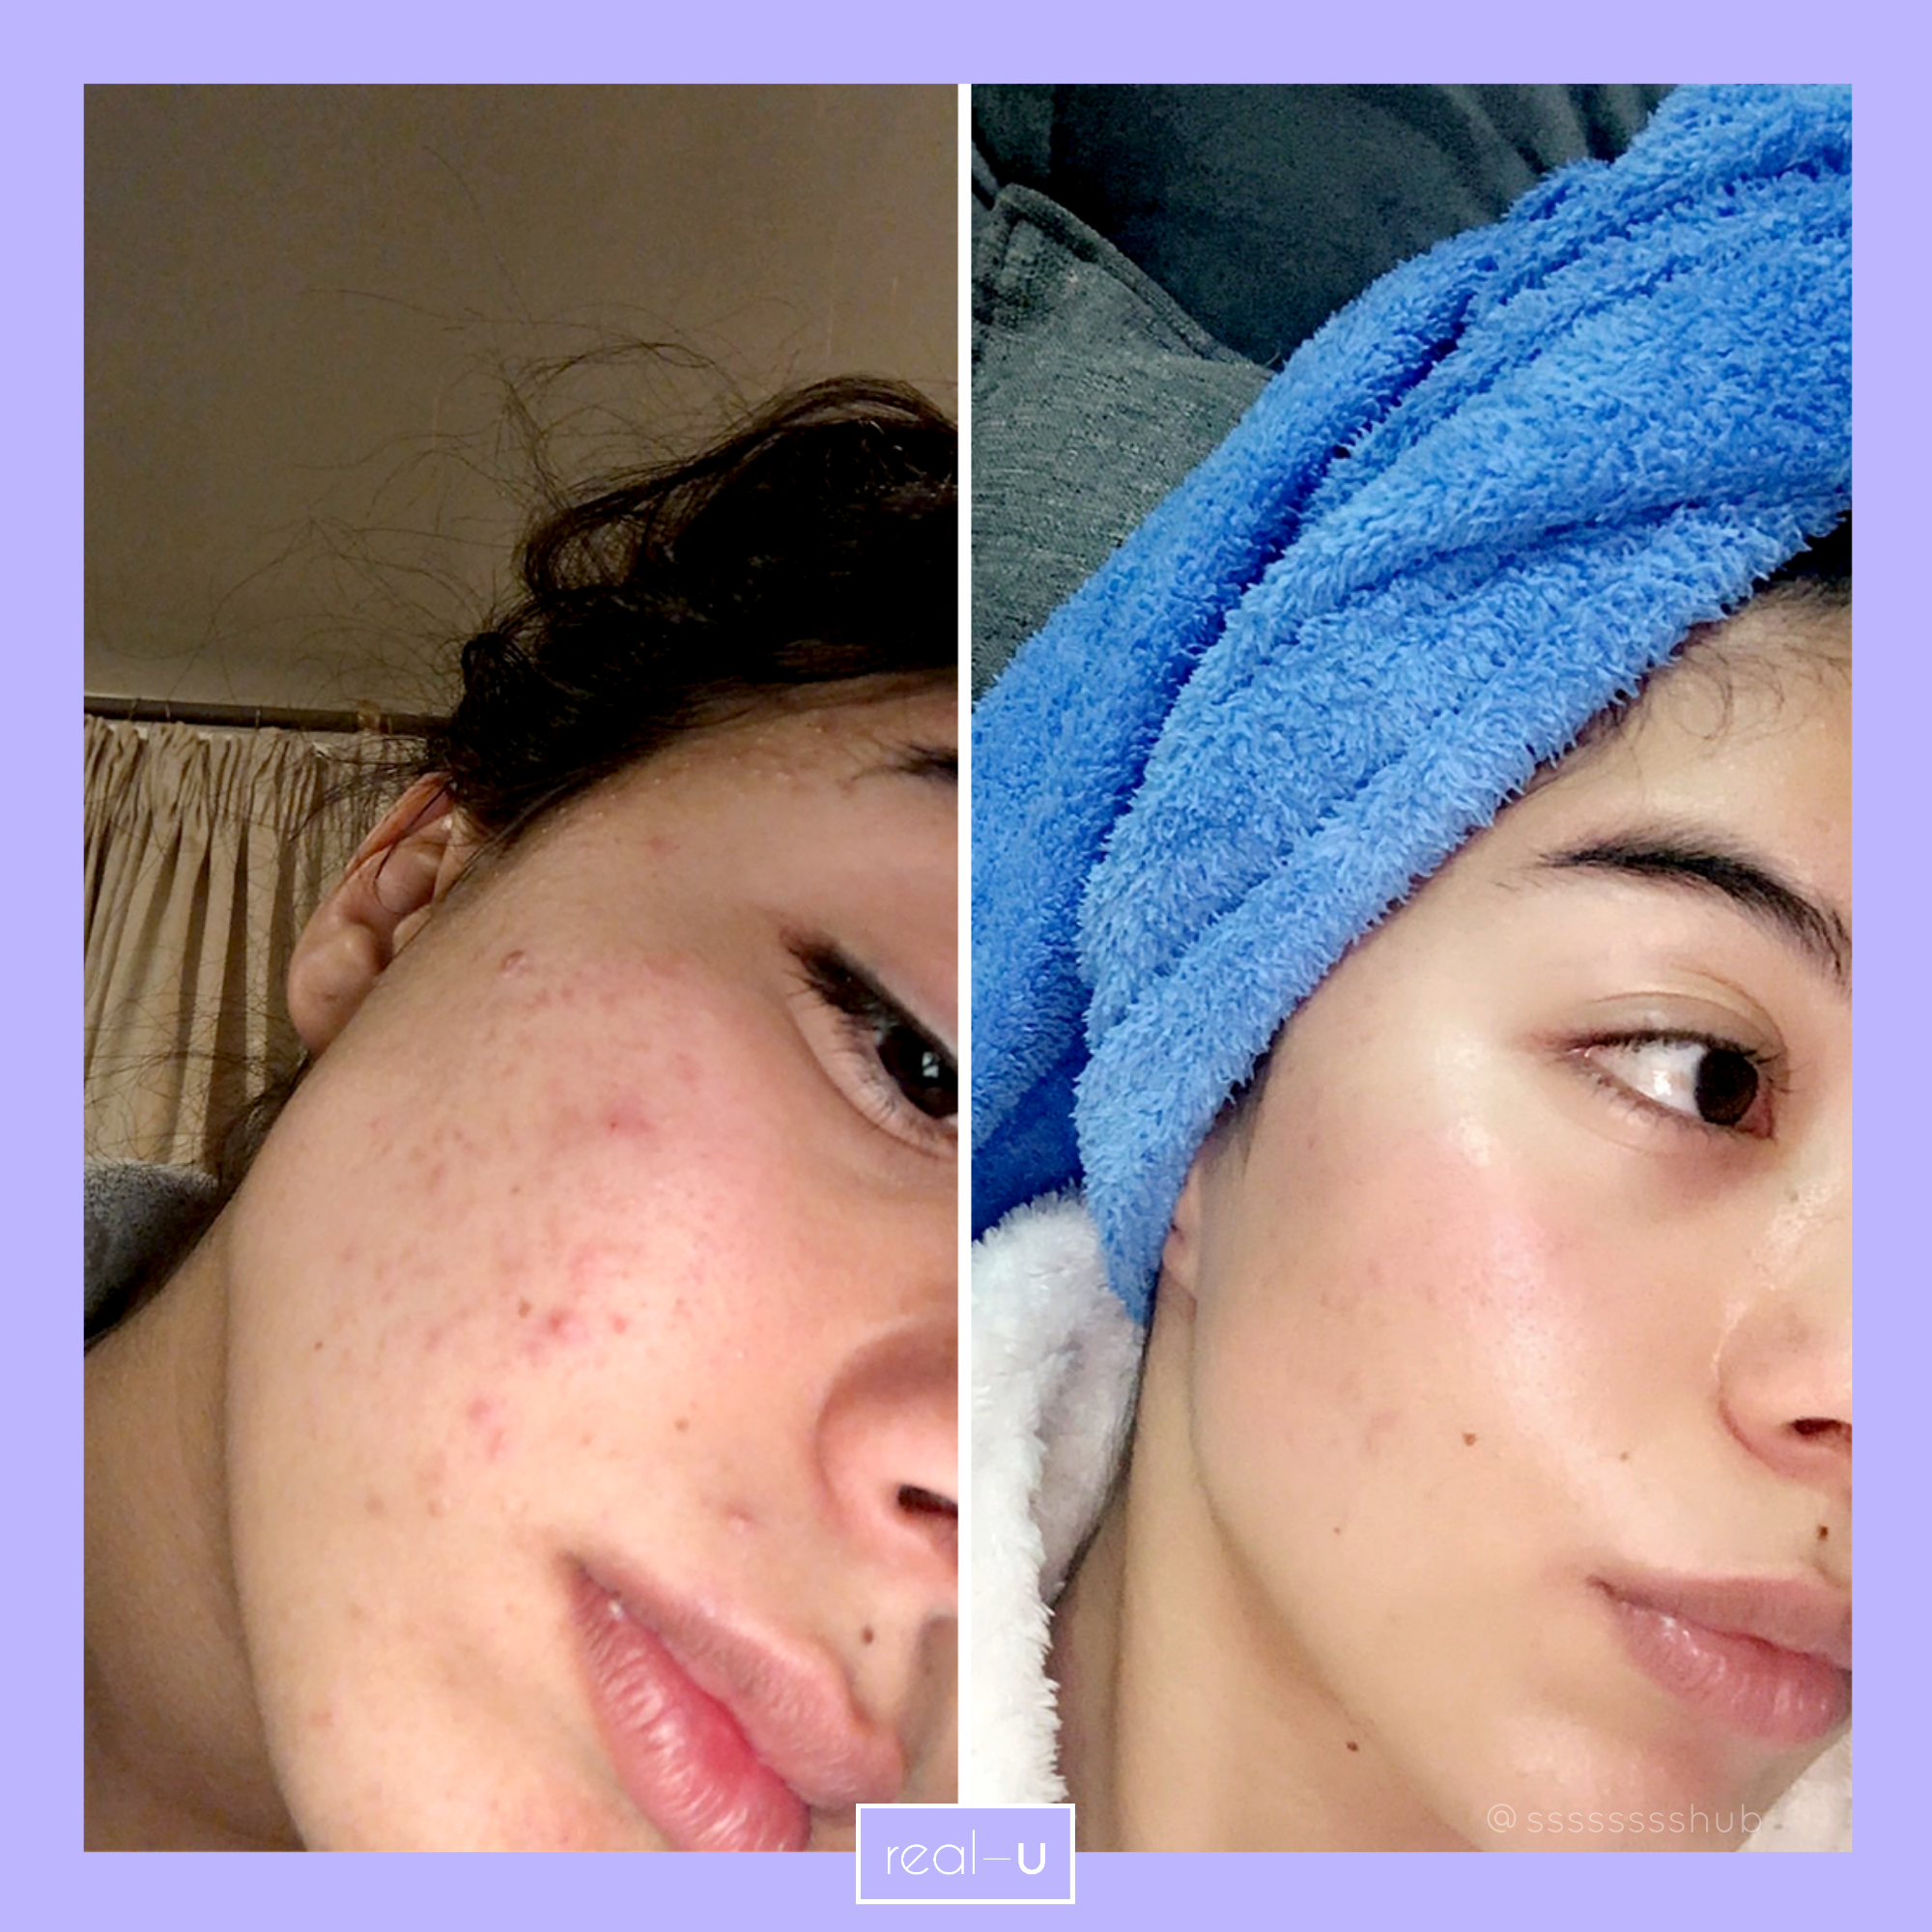 real-u before and after acne results with Green Luxe Kit